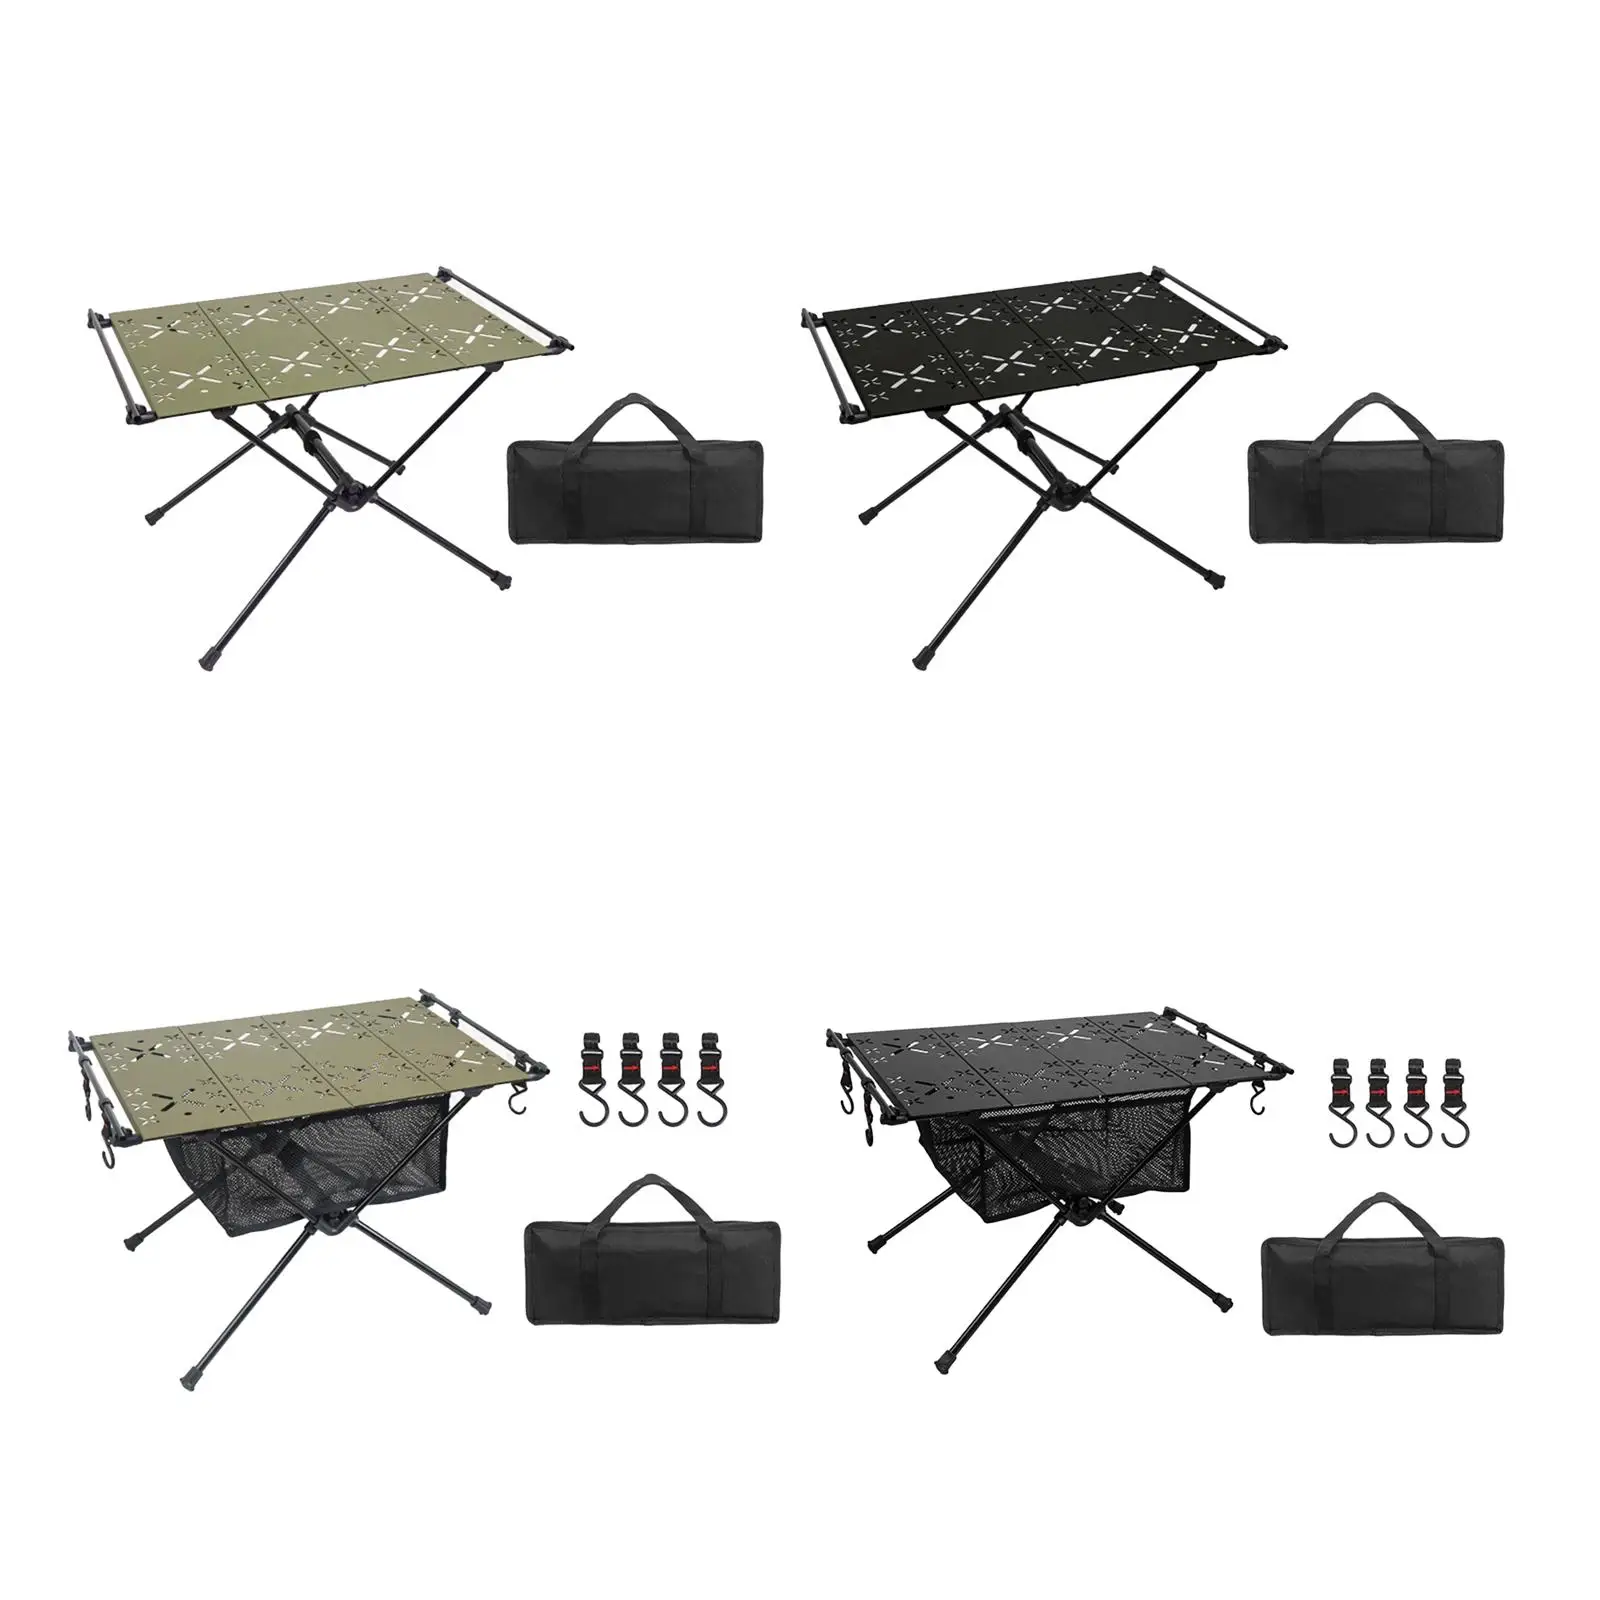 Folding Camping Table Camping Desk Camp Table Lightweight Outdoor Table Beach Table for Backyard Picnic Garden Hiking Fishing